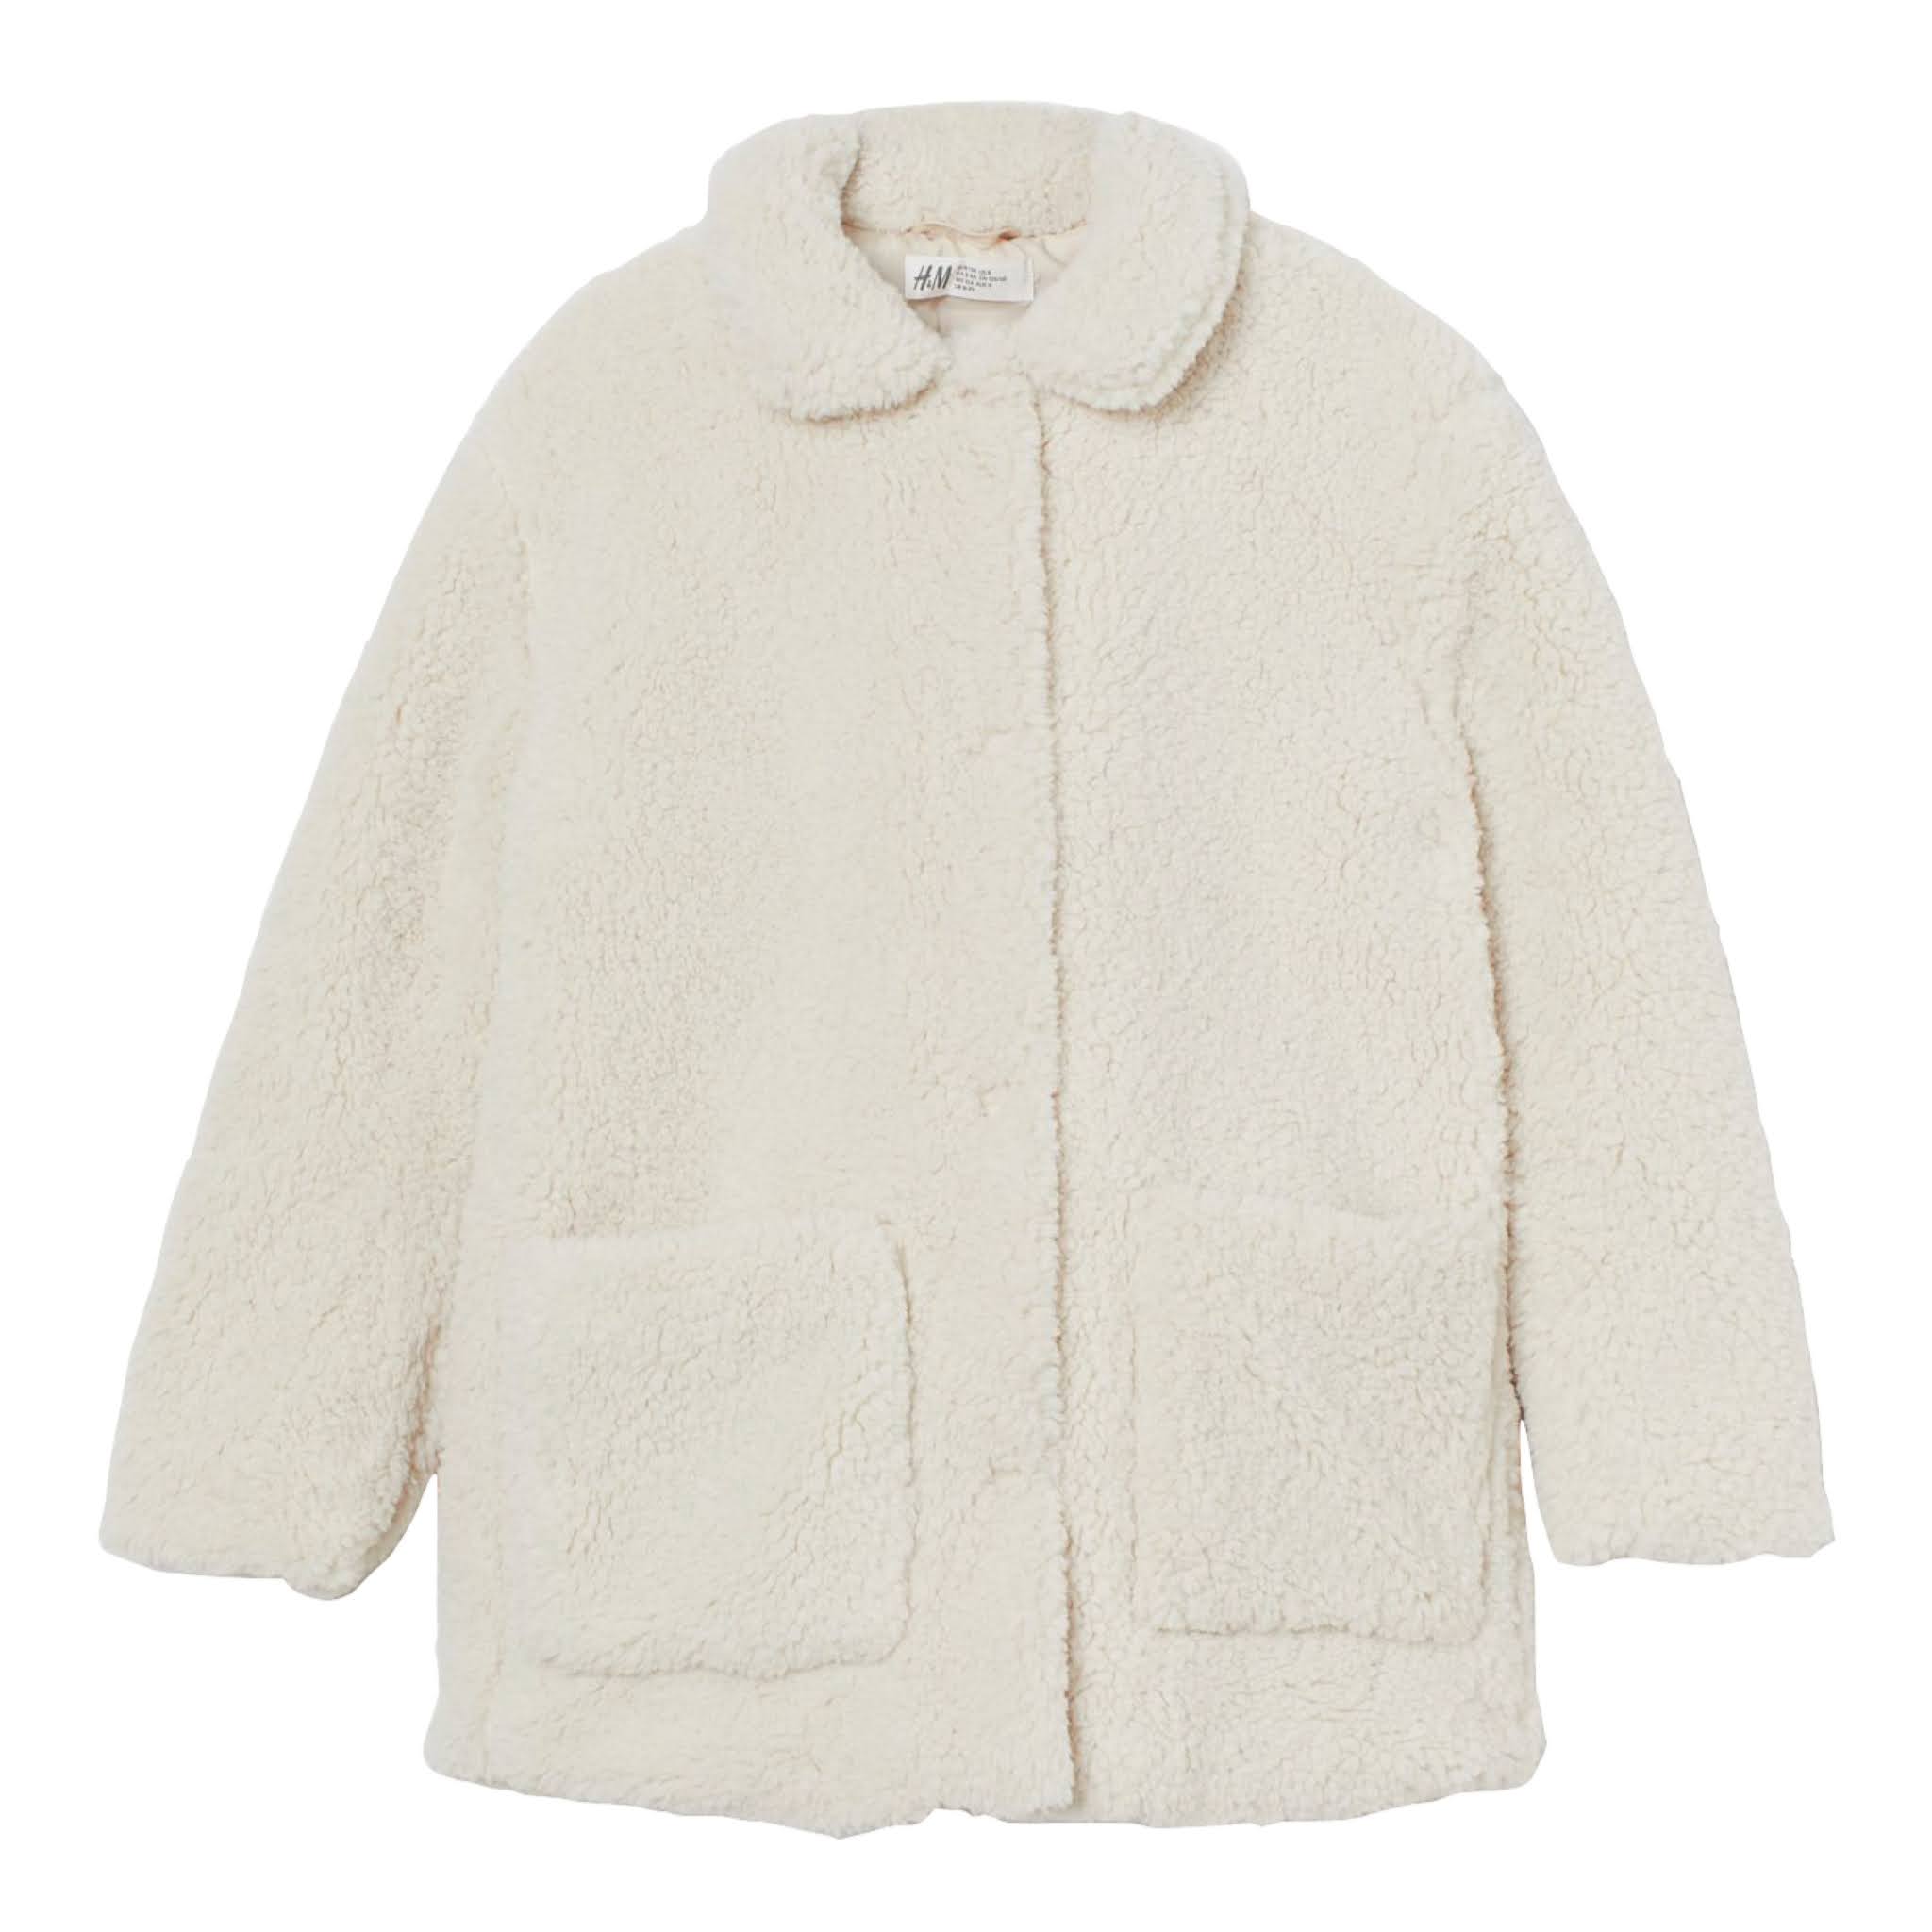 Kids Faux Shearling Cream Coat from H&M Kids